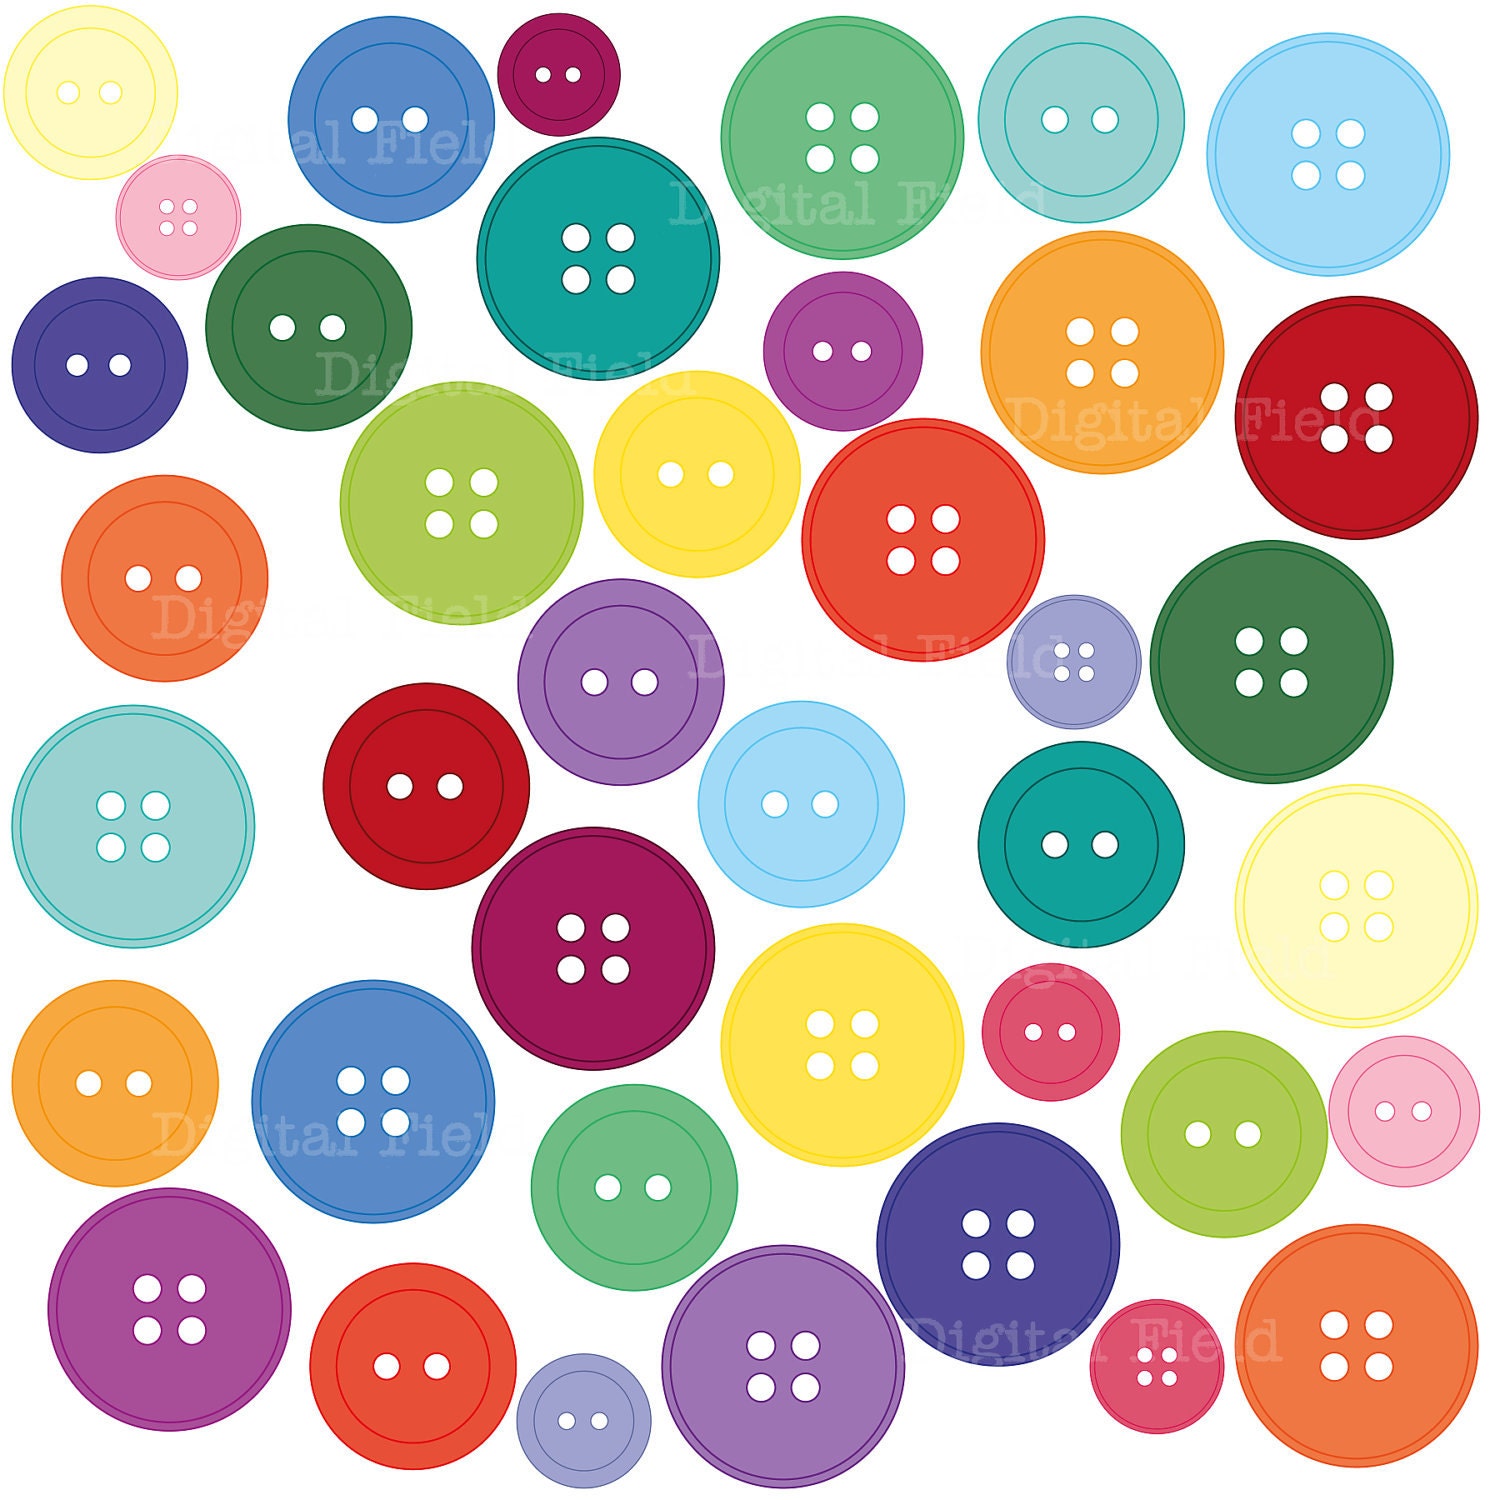 colorful-buttons-clip-art-set-40-buttons-by-digitalfield-on-etsy